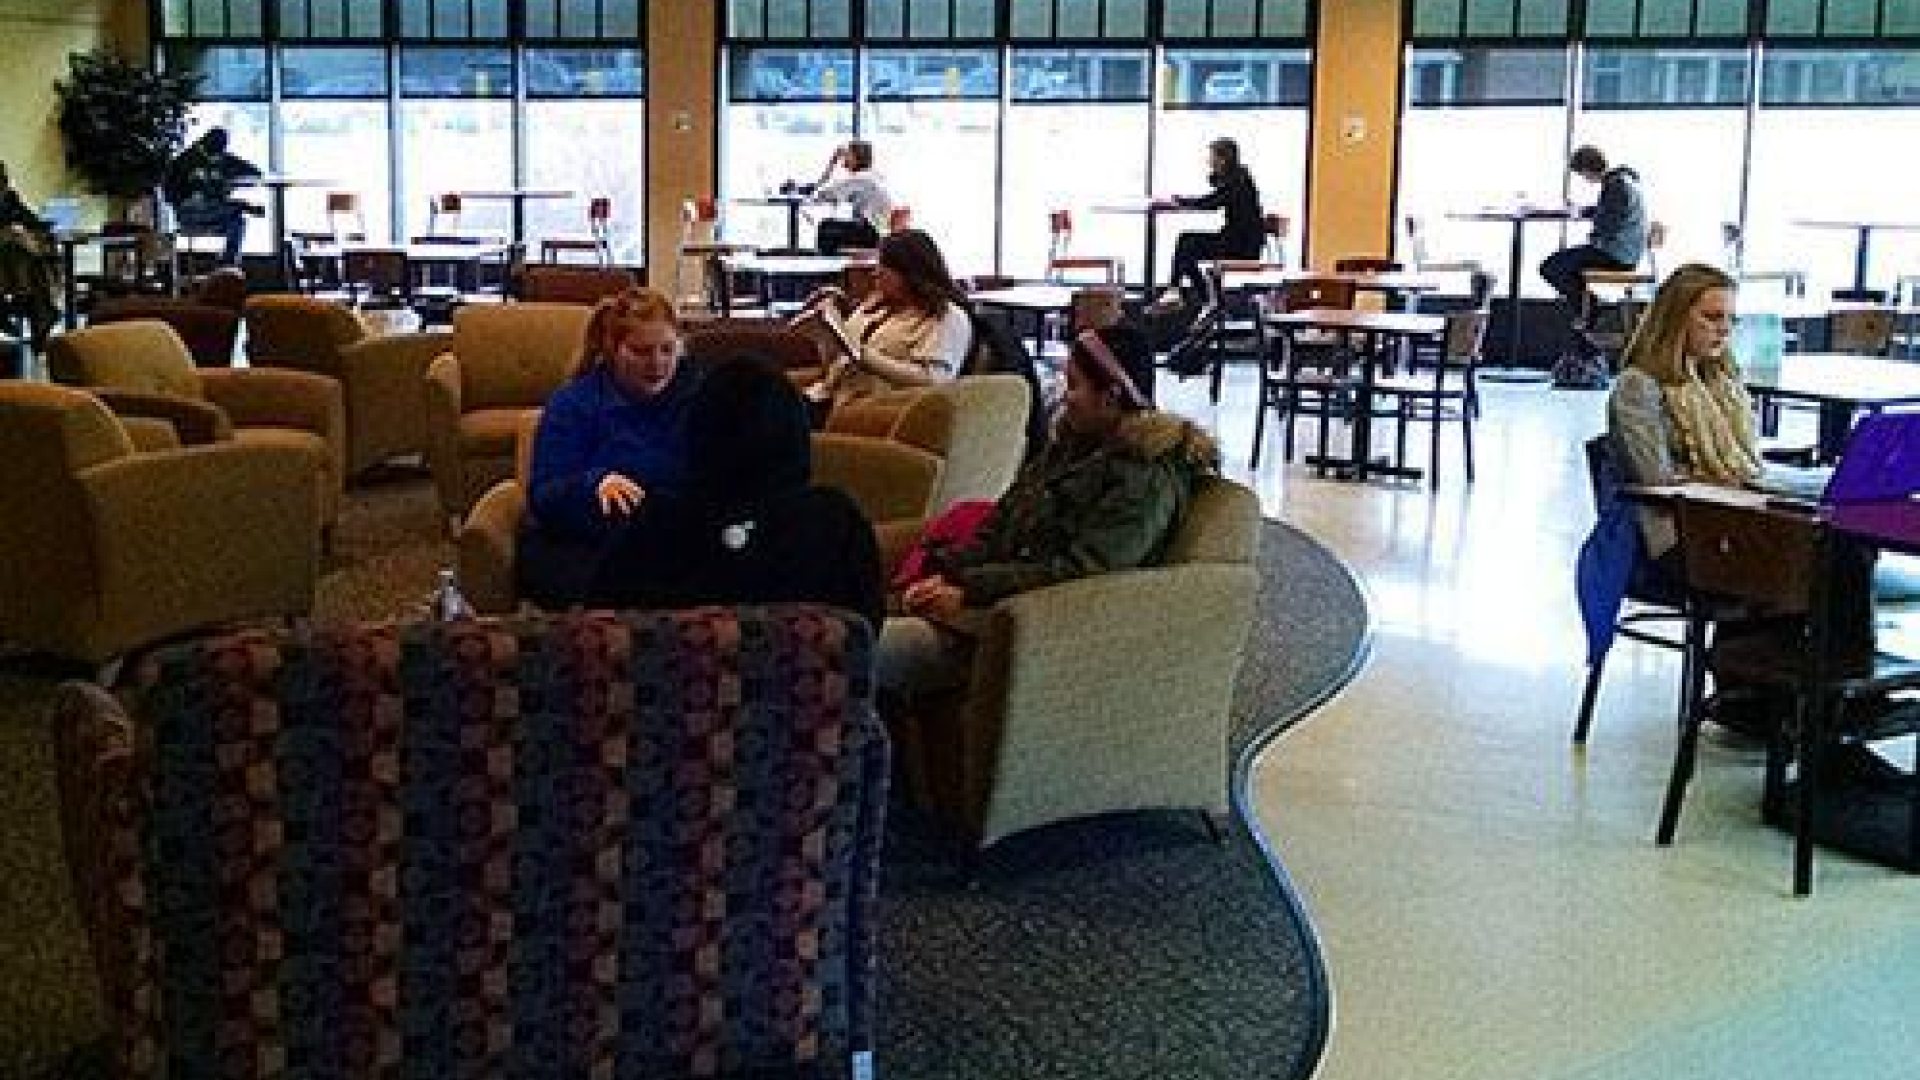 Students at Lake Effect Cafe